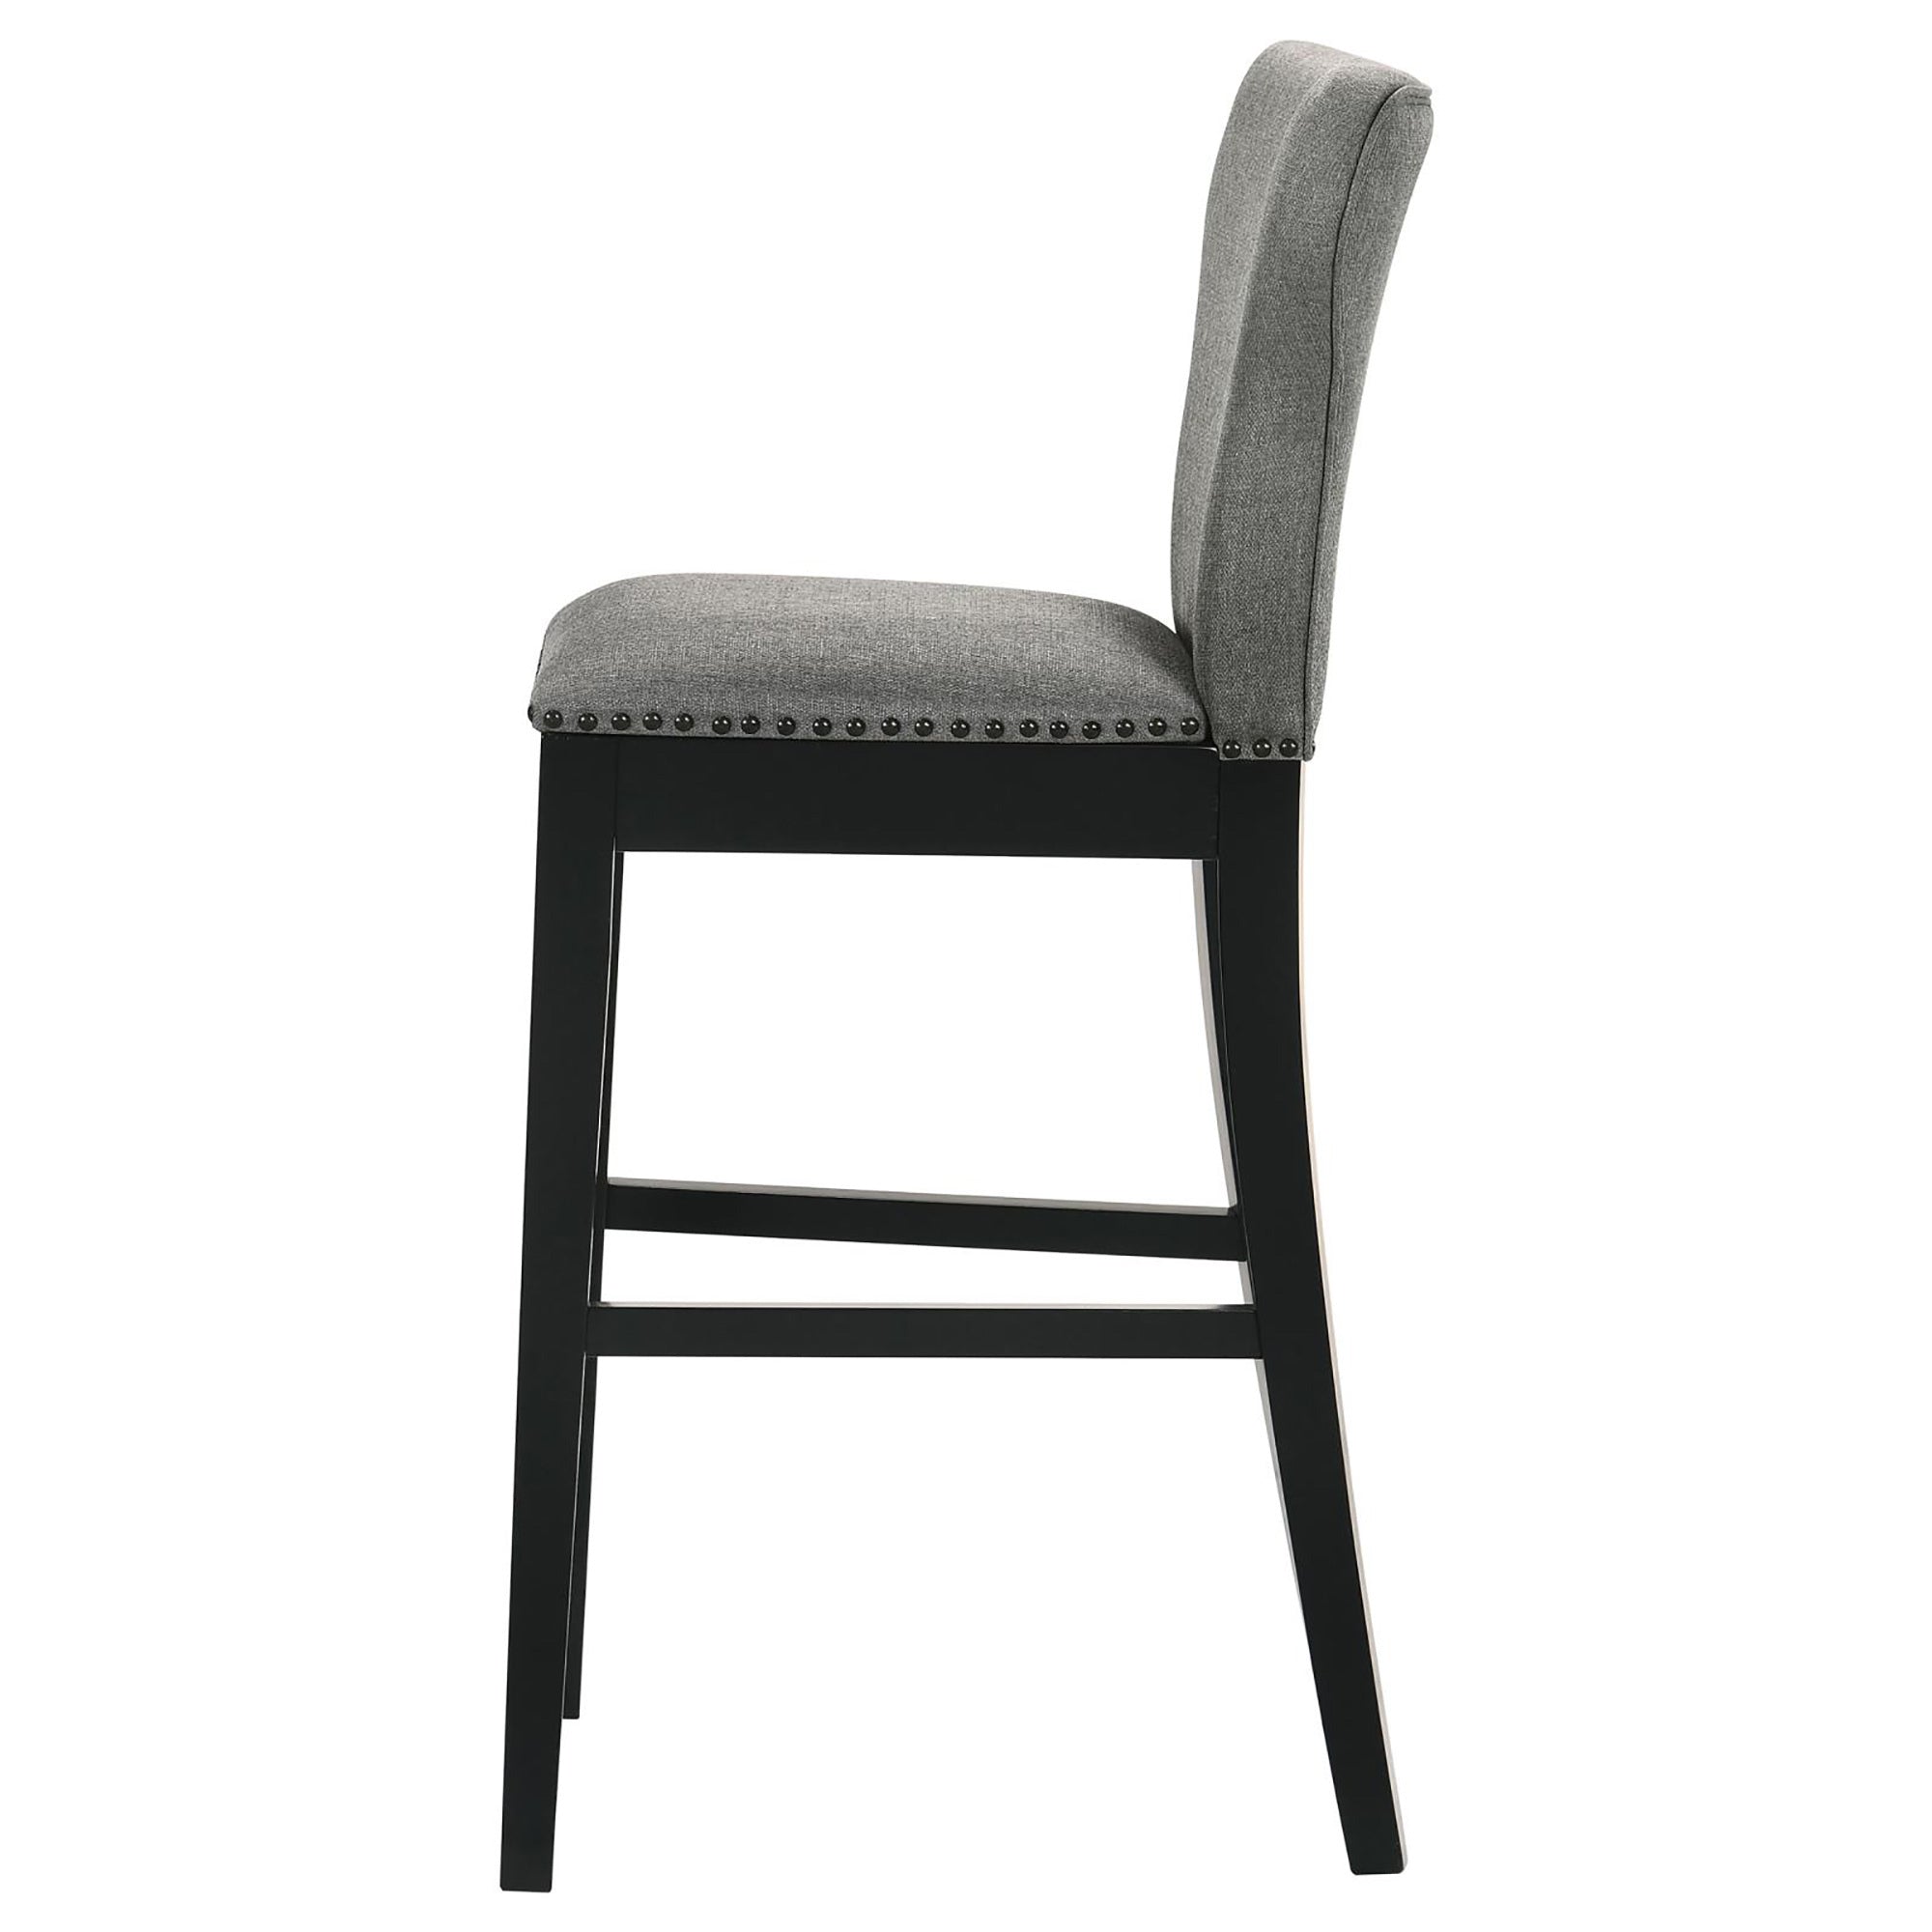 Grey and Black Stool with Nailhead Trim Set of 2 grey-dining room-wipe clean-transitional-bar